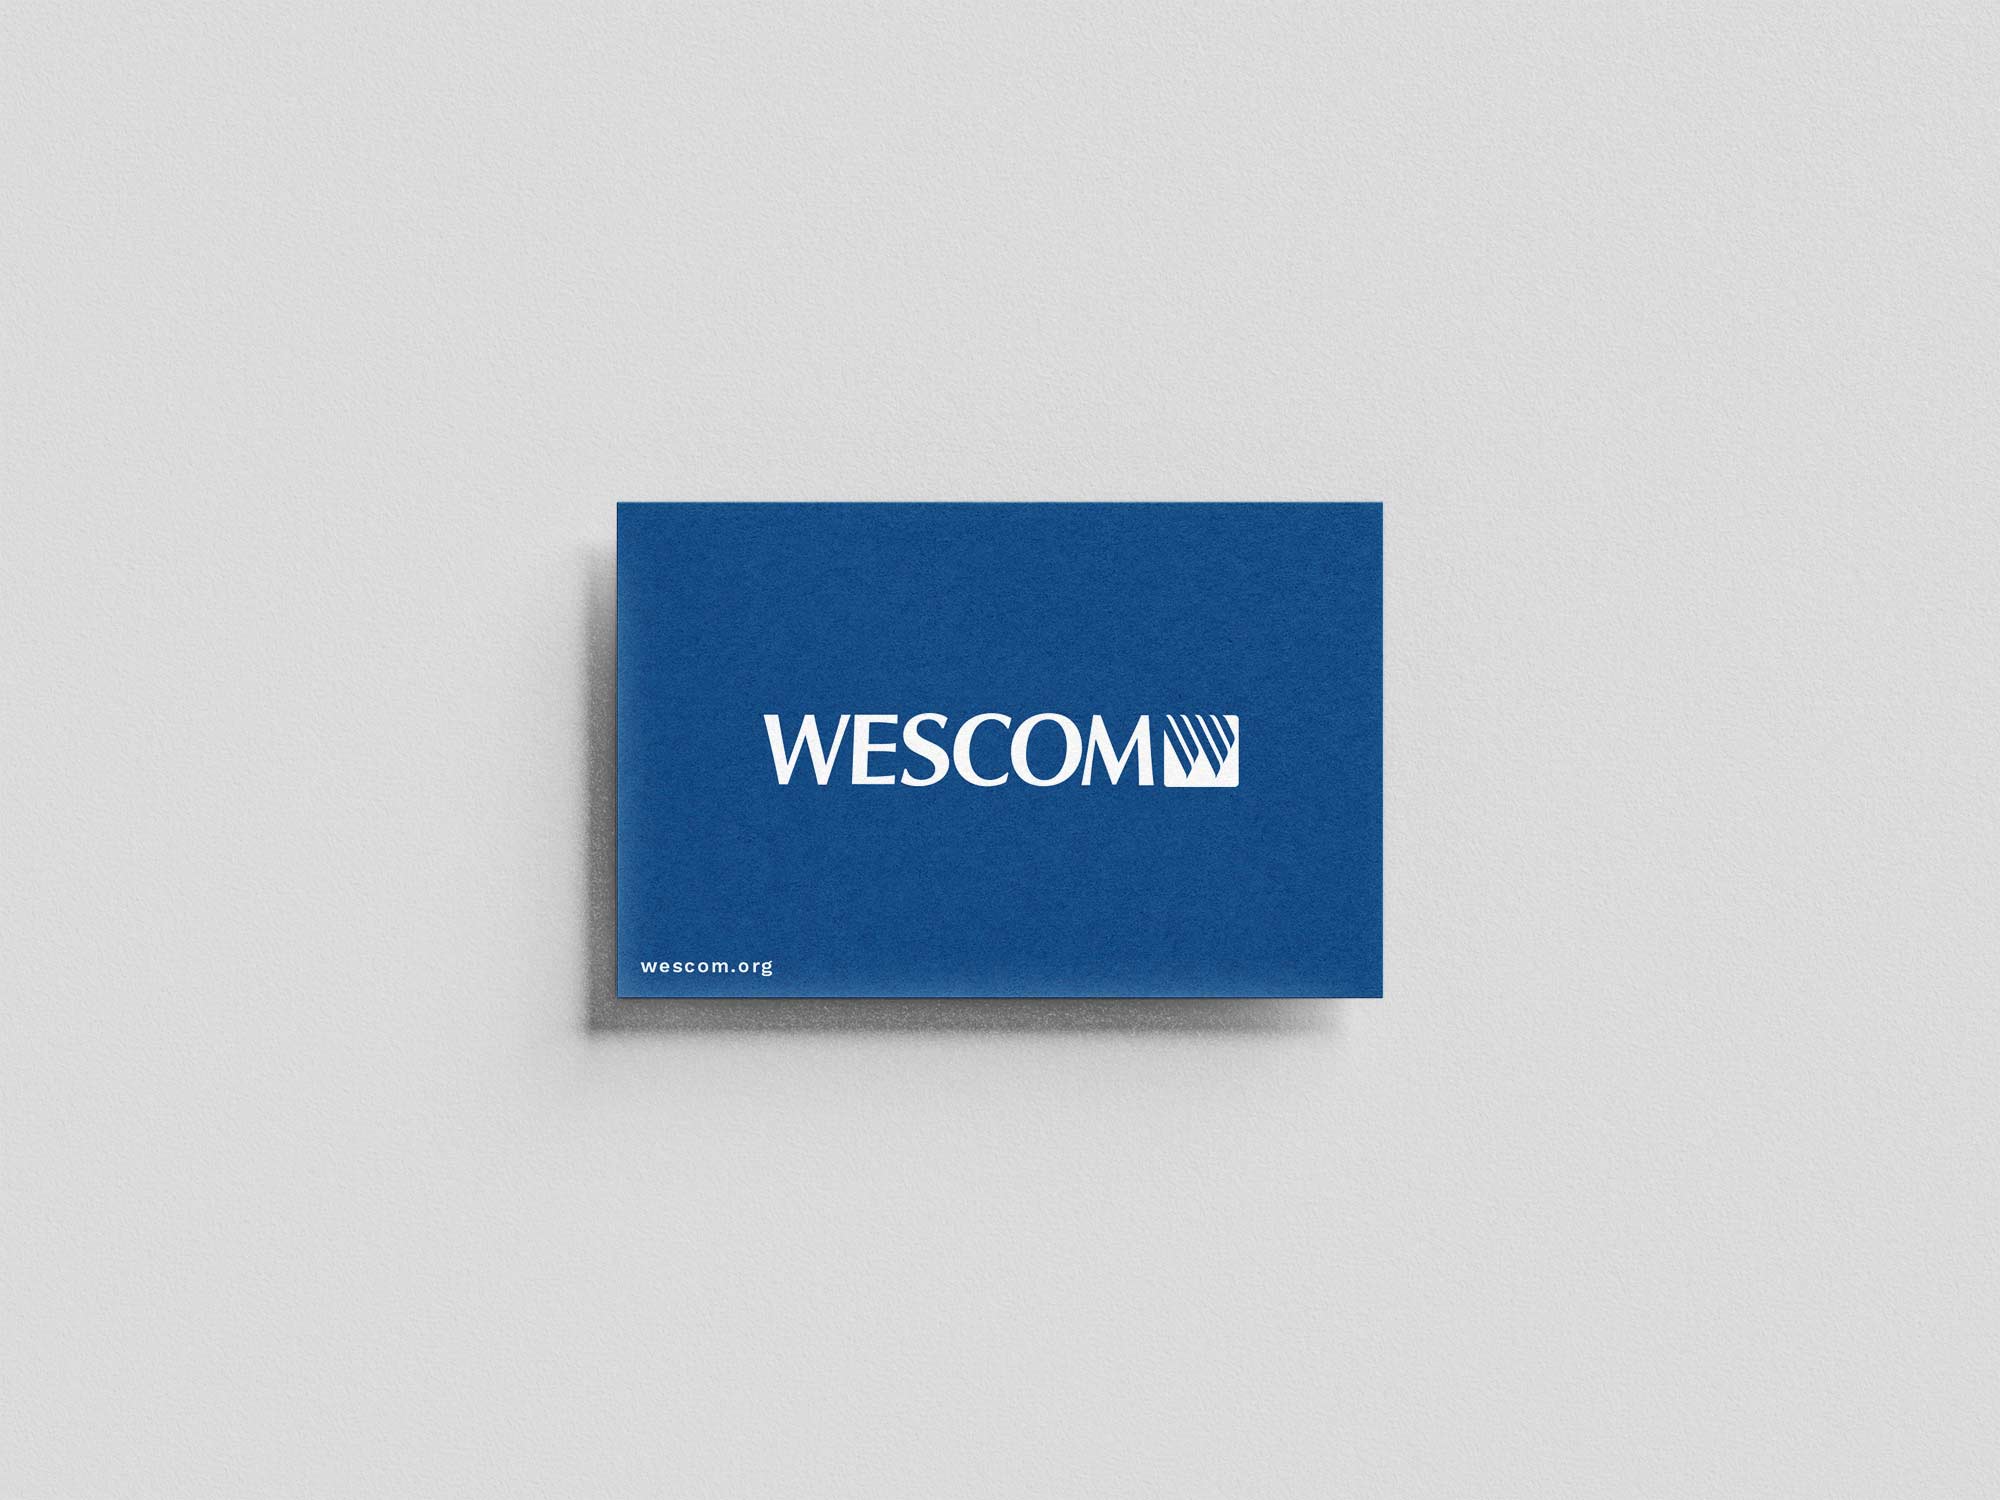 A blue business card for a bank with a logo on it.